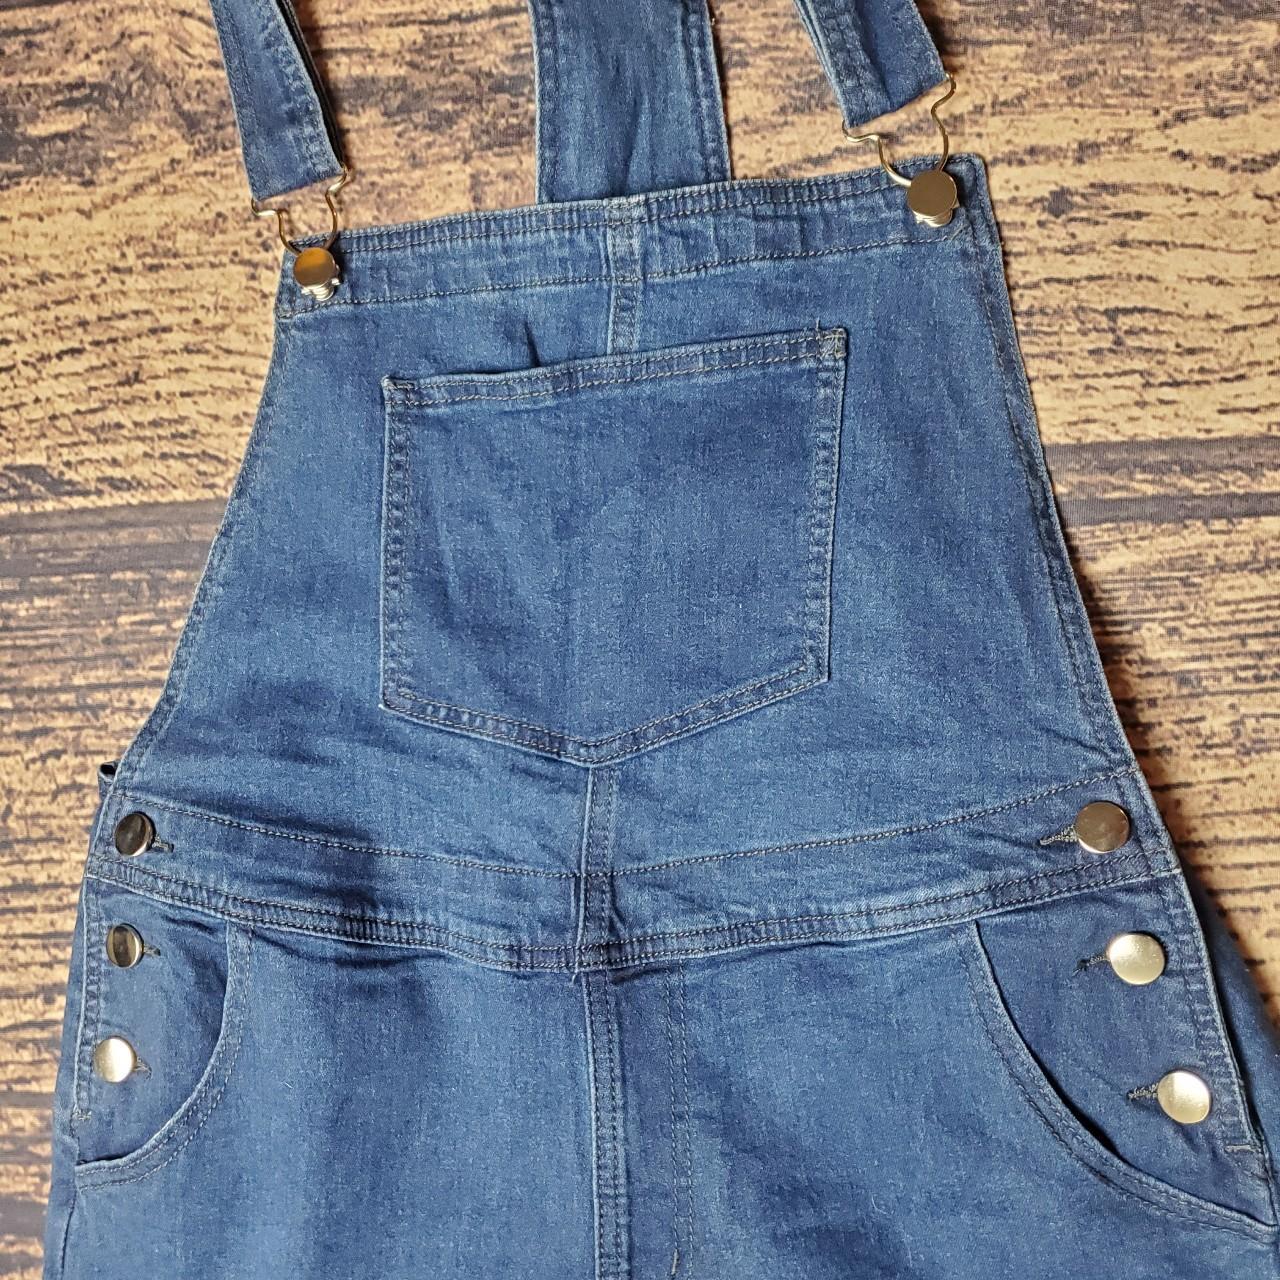 Product Image 2 - Denim Overall Shorts.
Size Large
The measurements